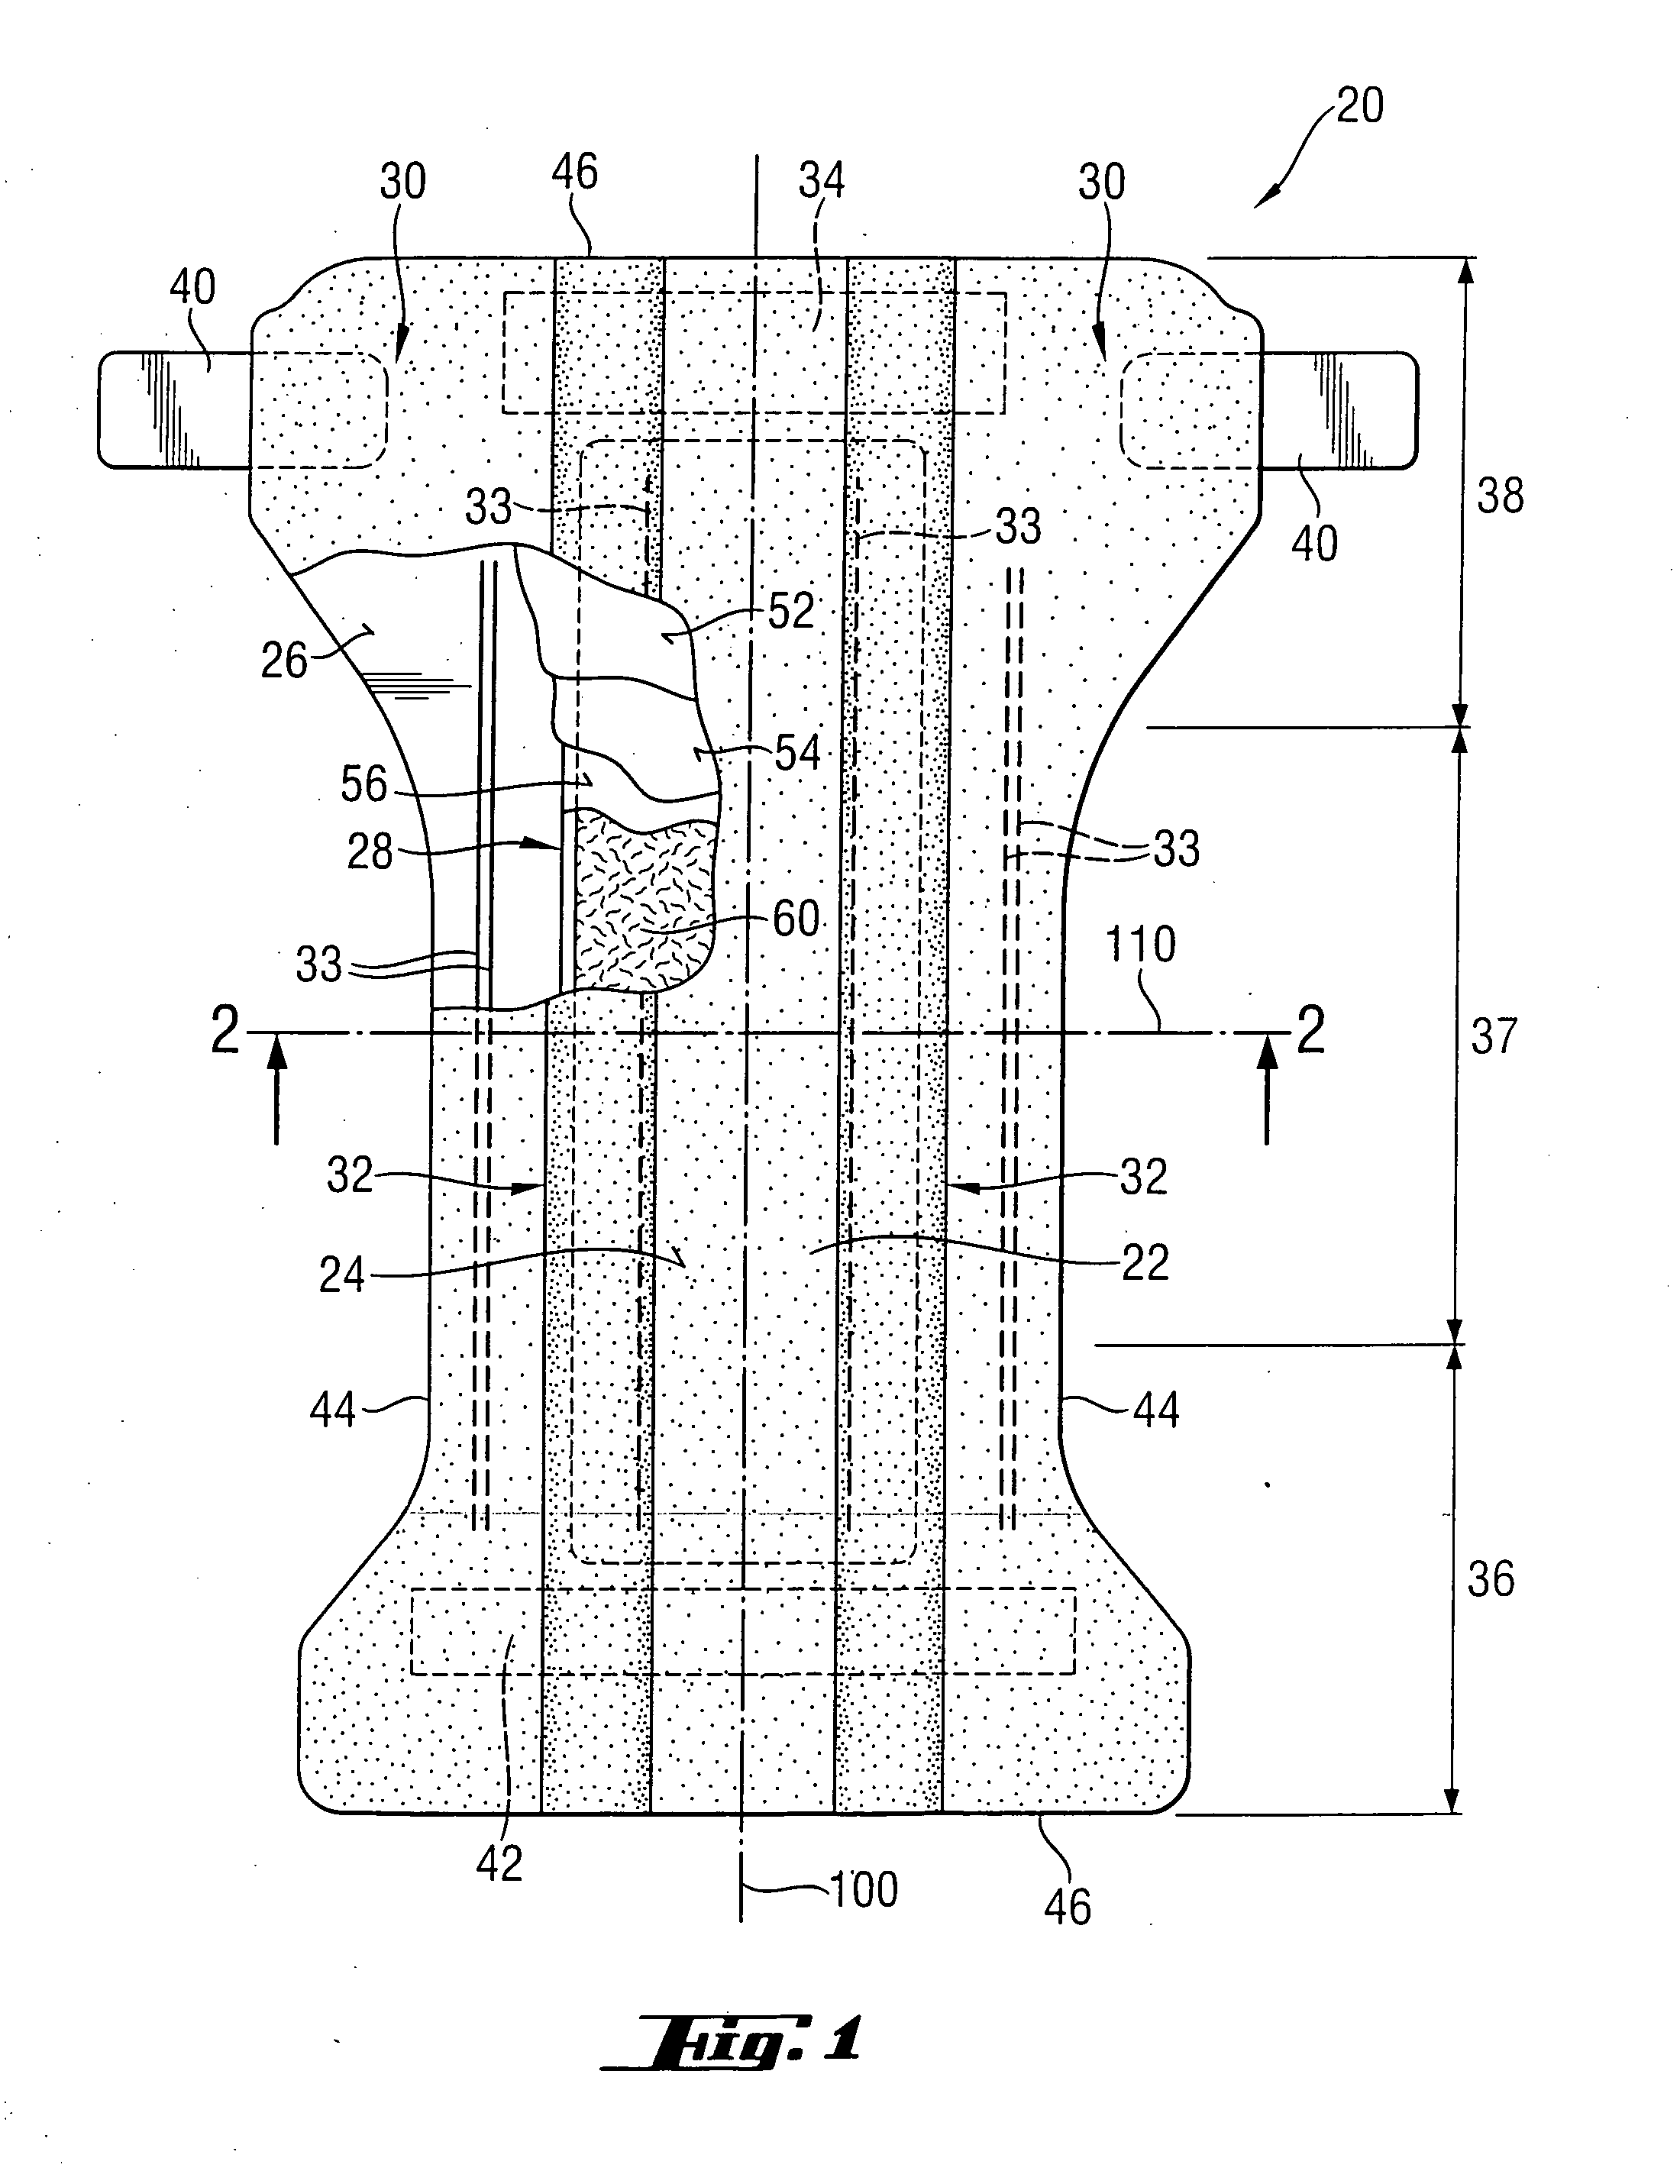 Absorbent articles comprising super absorbent polymer having a substantially non-convalently bonded surface coating